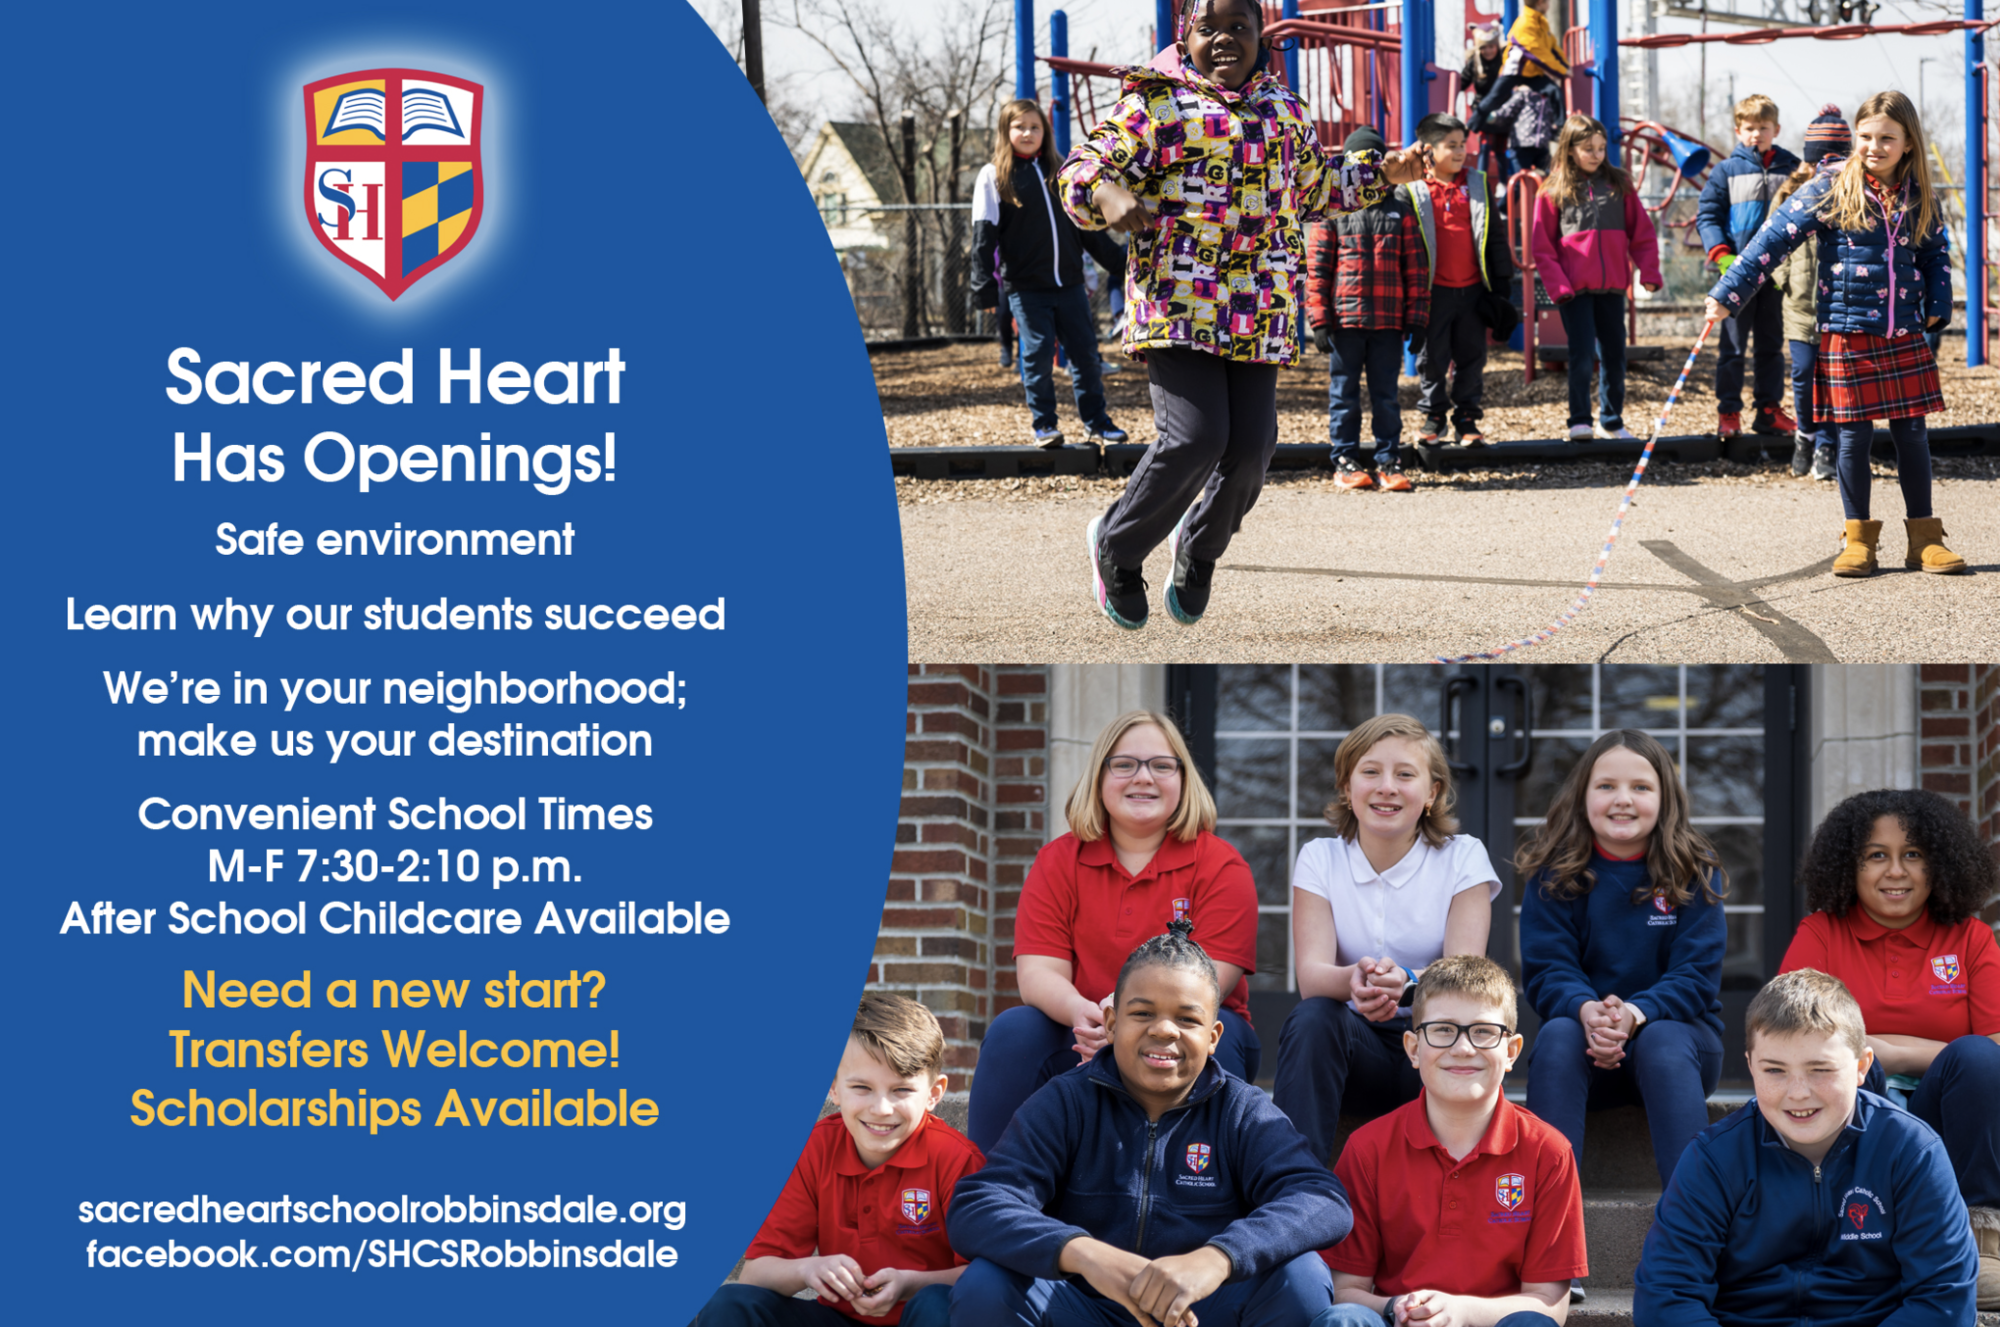 sacred heart Openings PC mailer